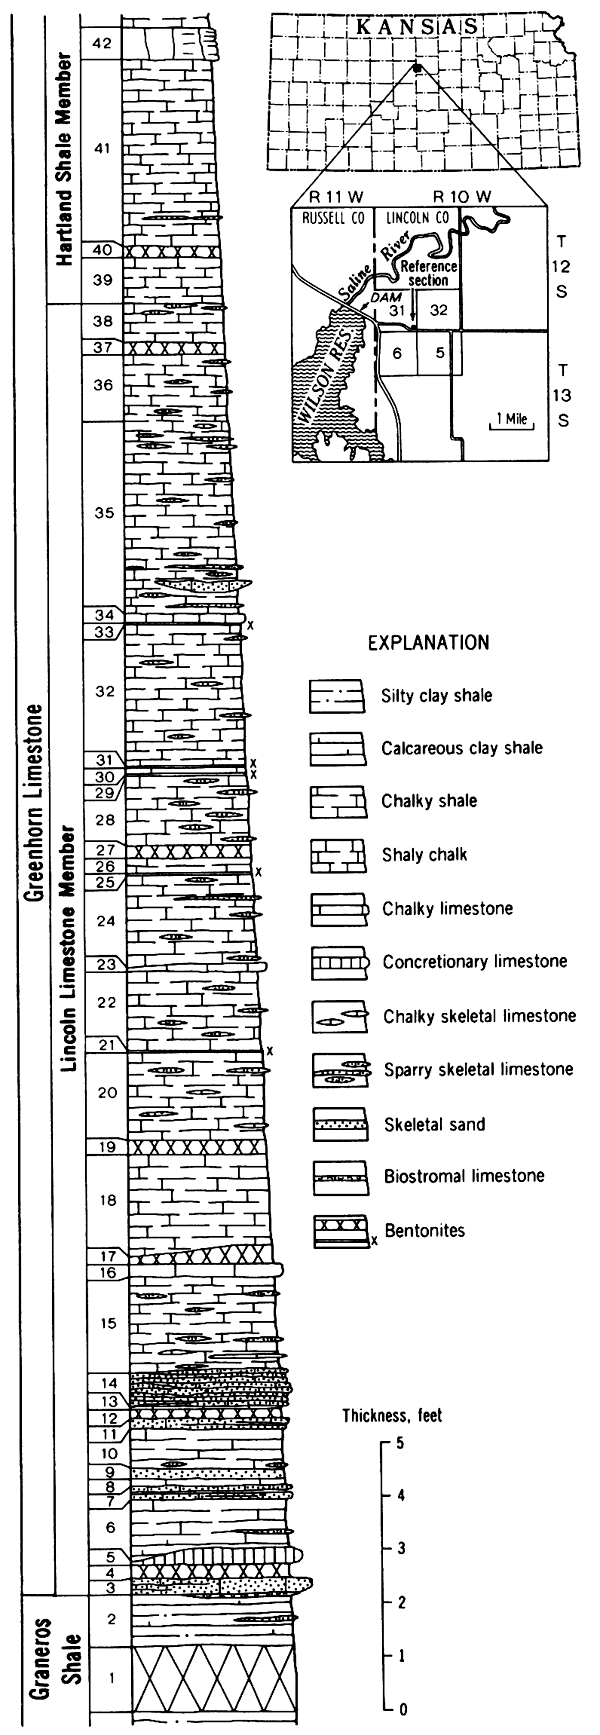 Reference section; from bottom Graneros Shale, Greenhorn Limestone (Lincoln Limestone Member and Hartland Shale Member).